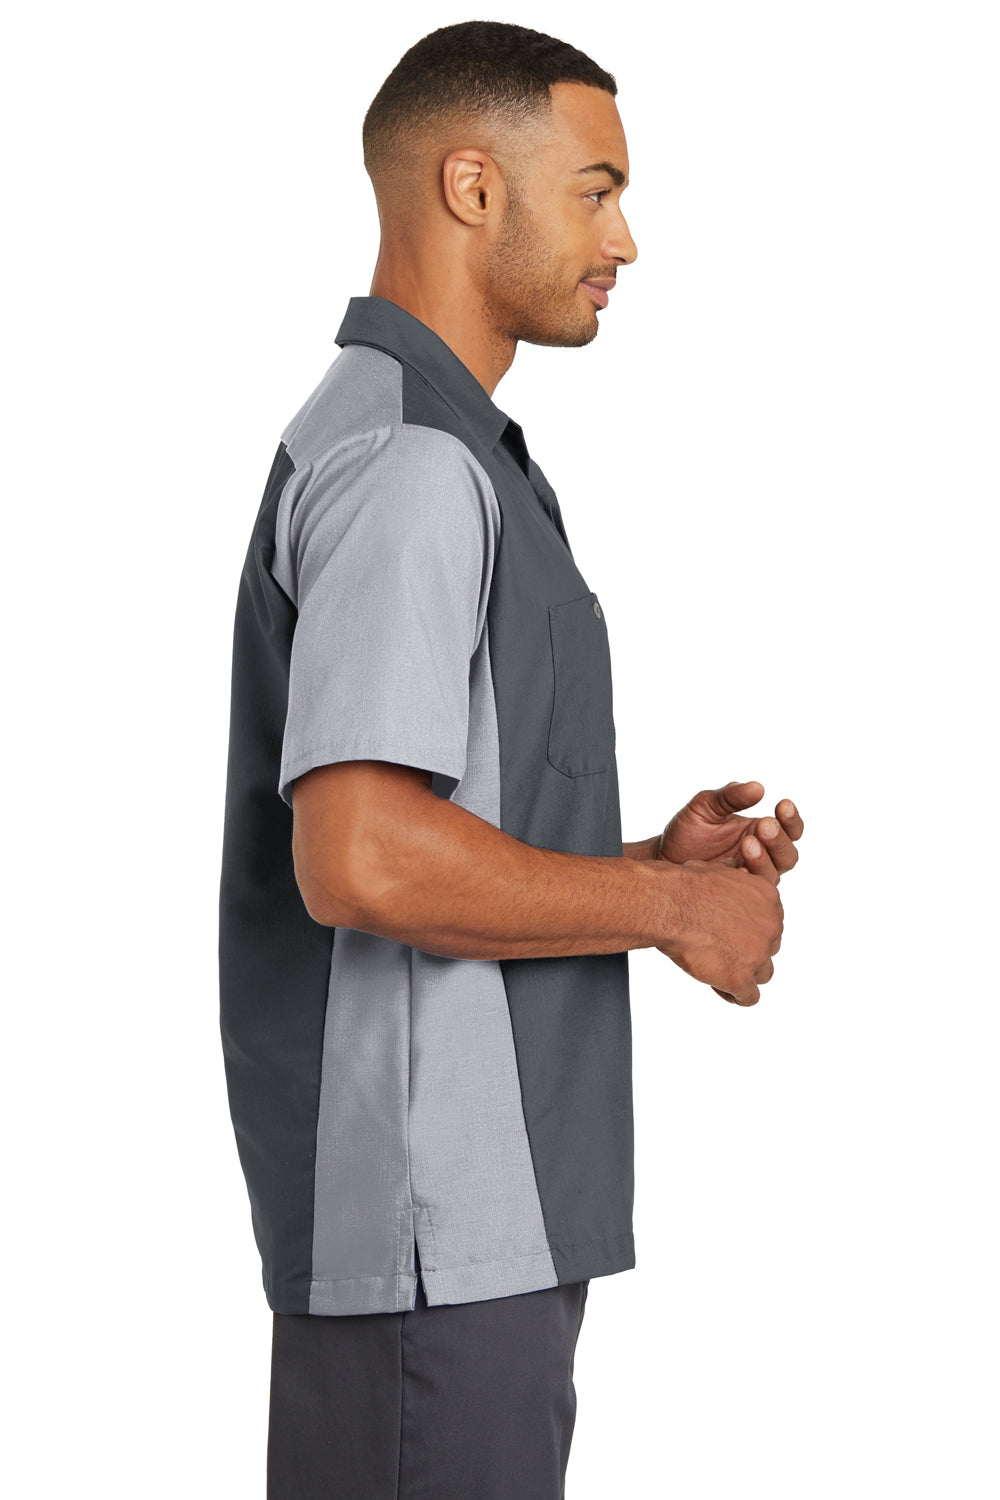 Red Kap SY20 Mens Crew Moisture Wicking Short Sleeve Button Down Shirt w/ Double Pockets Charcoal Grey/Light Grey Side